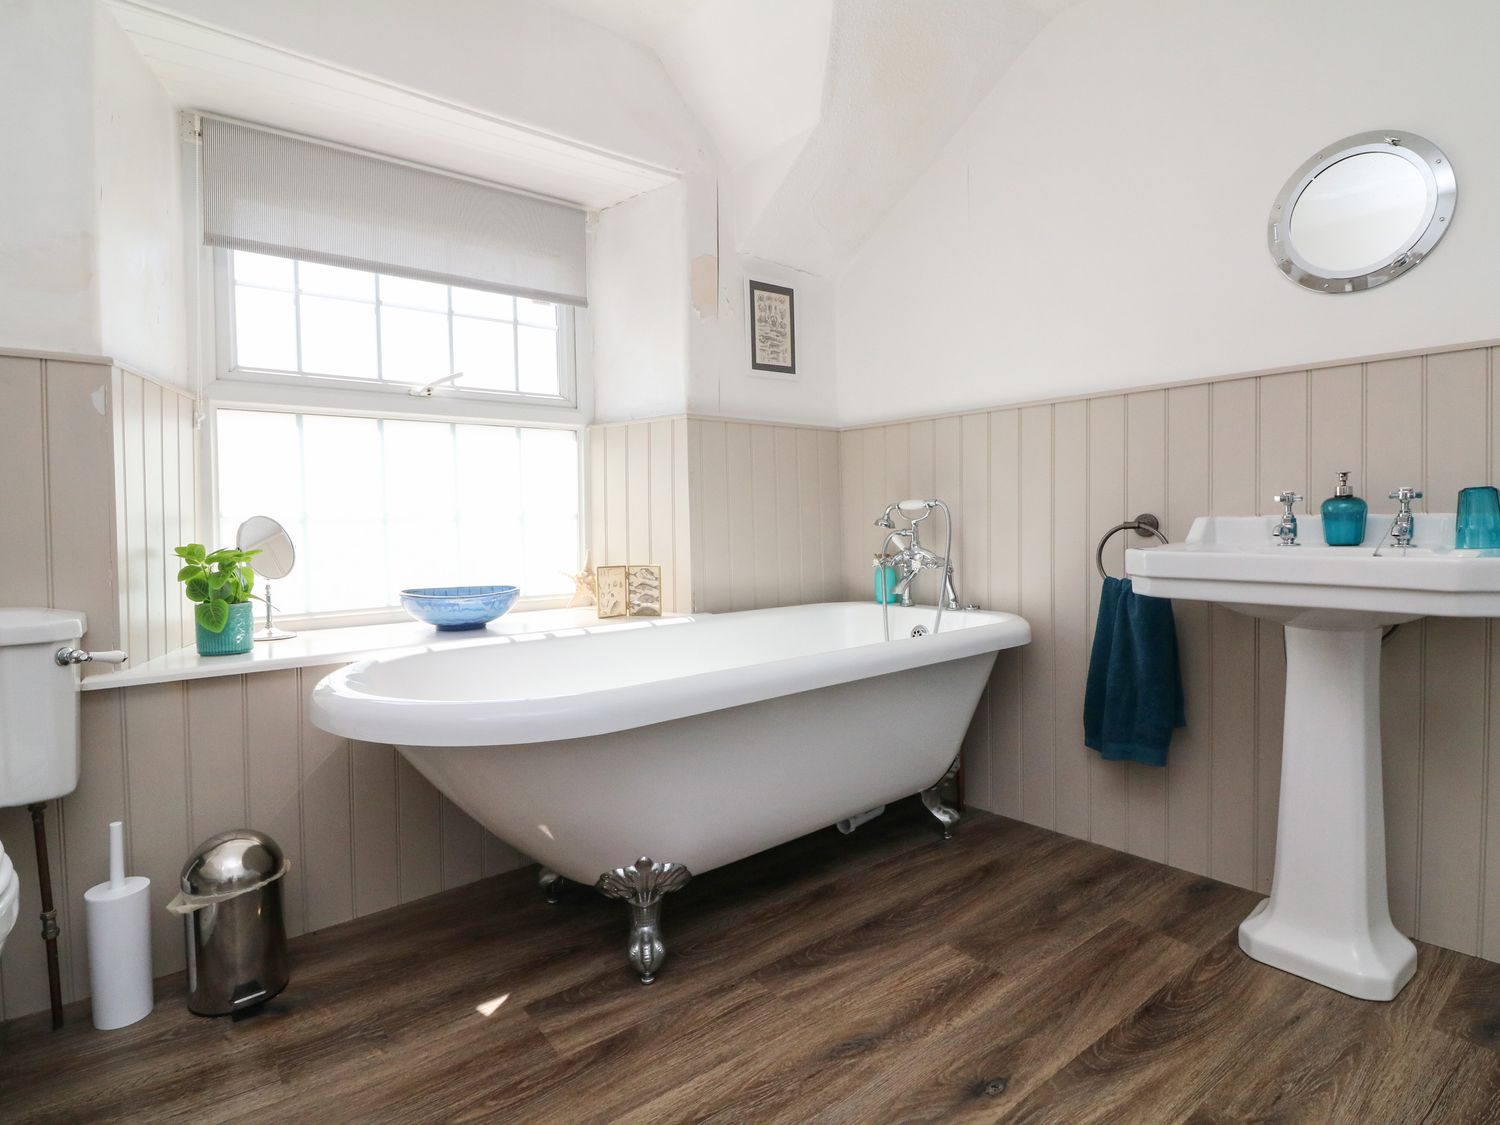 Puffin House, Hartland, Devon. 3-bedrooms. Remote situation. Farmhouse. Pet-friendly. Hot tub. WiFi.